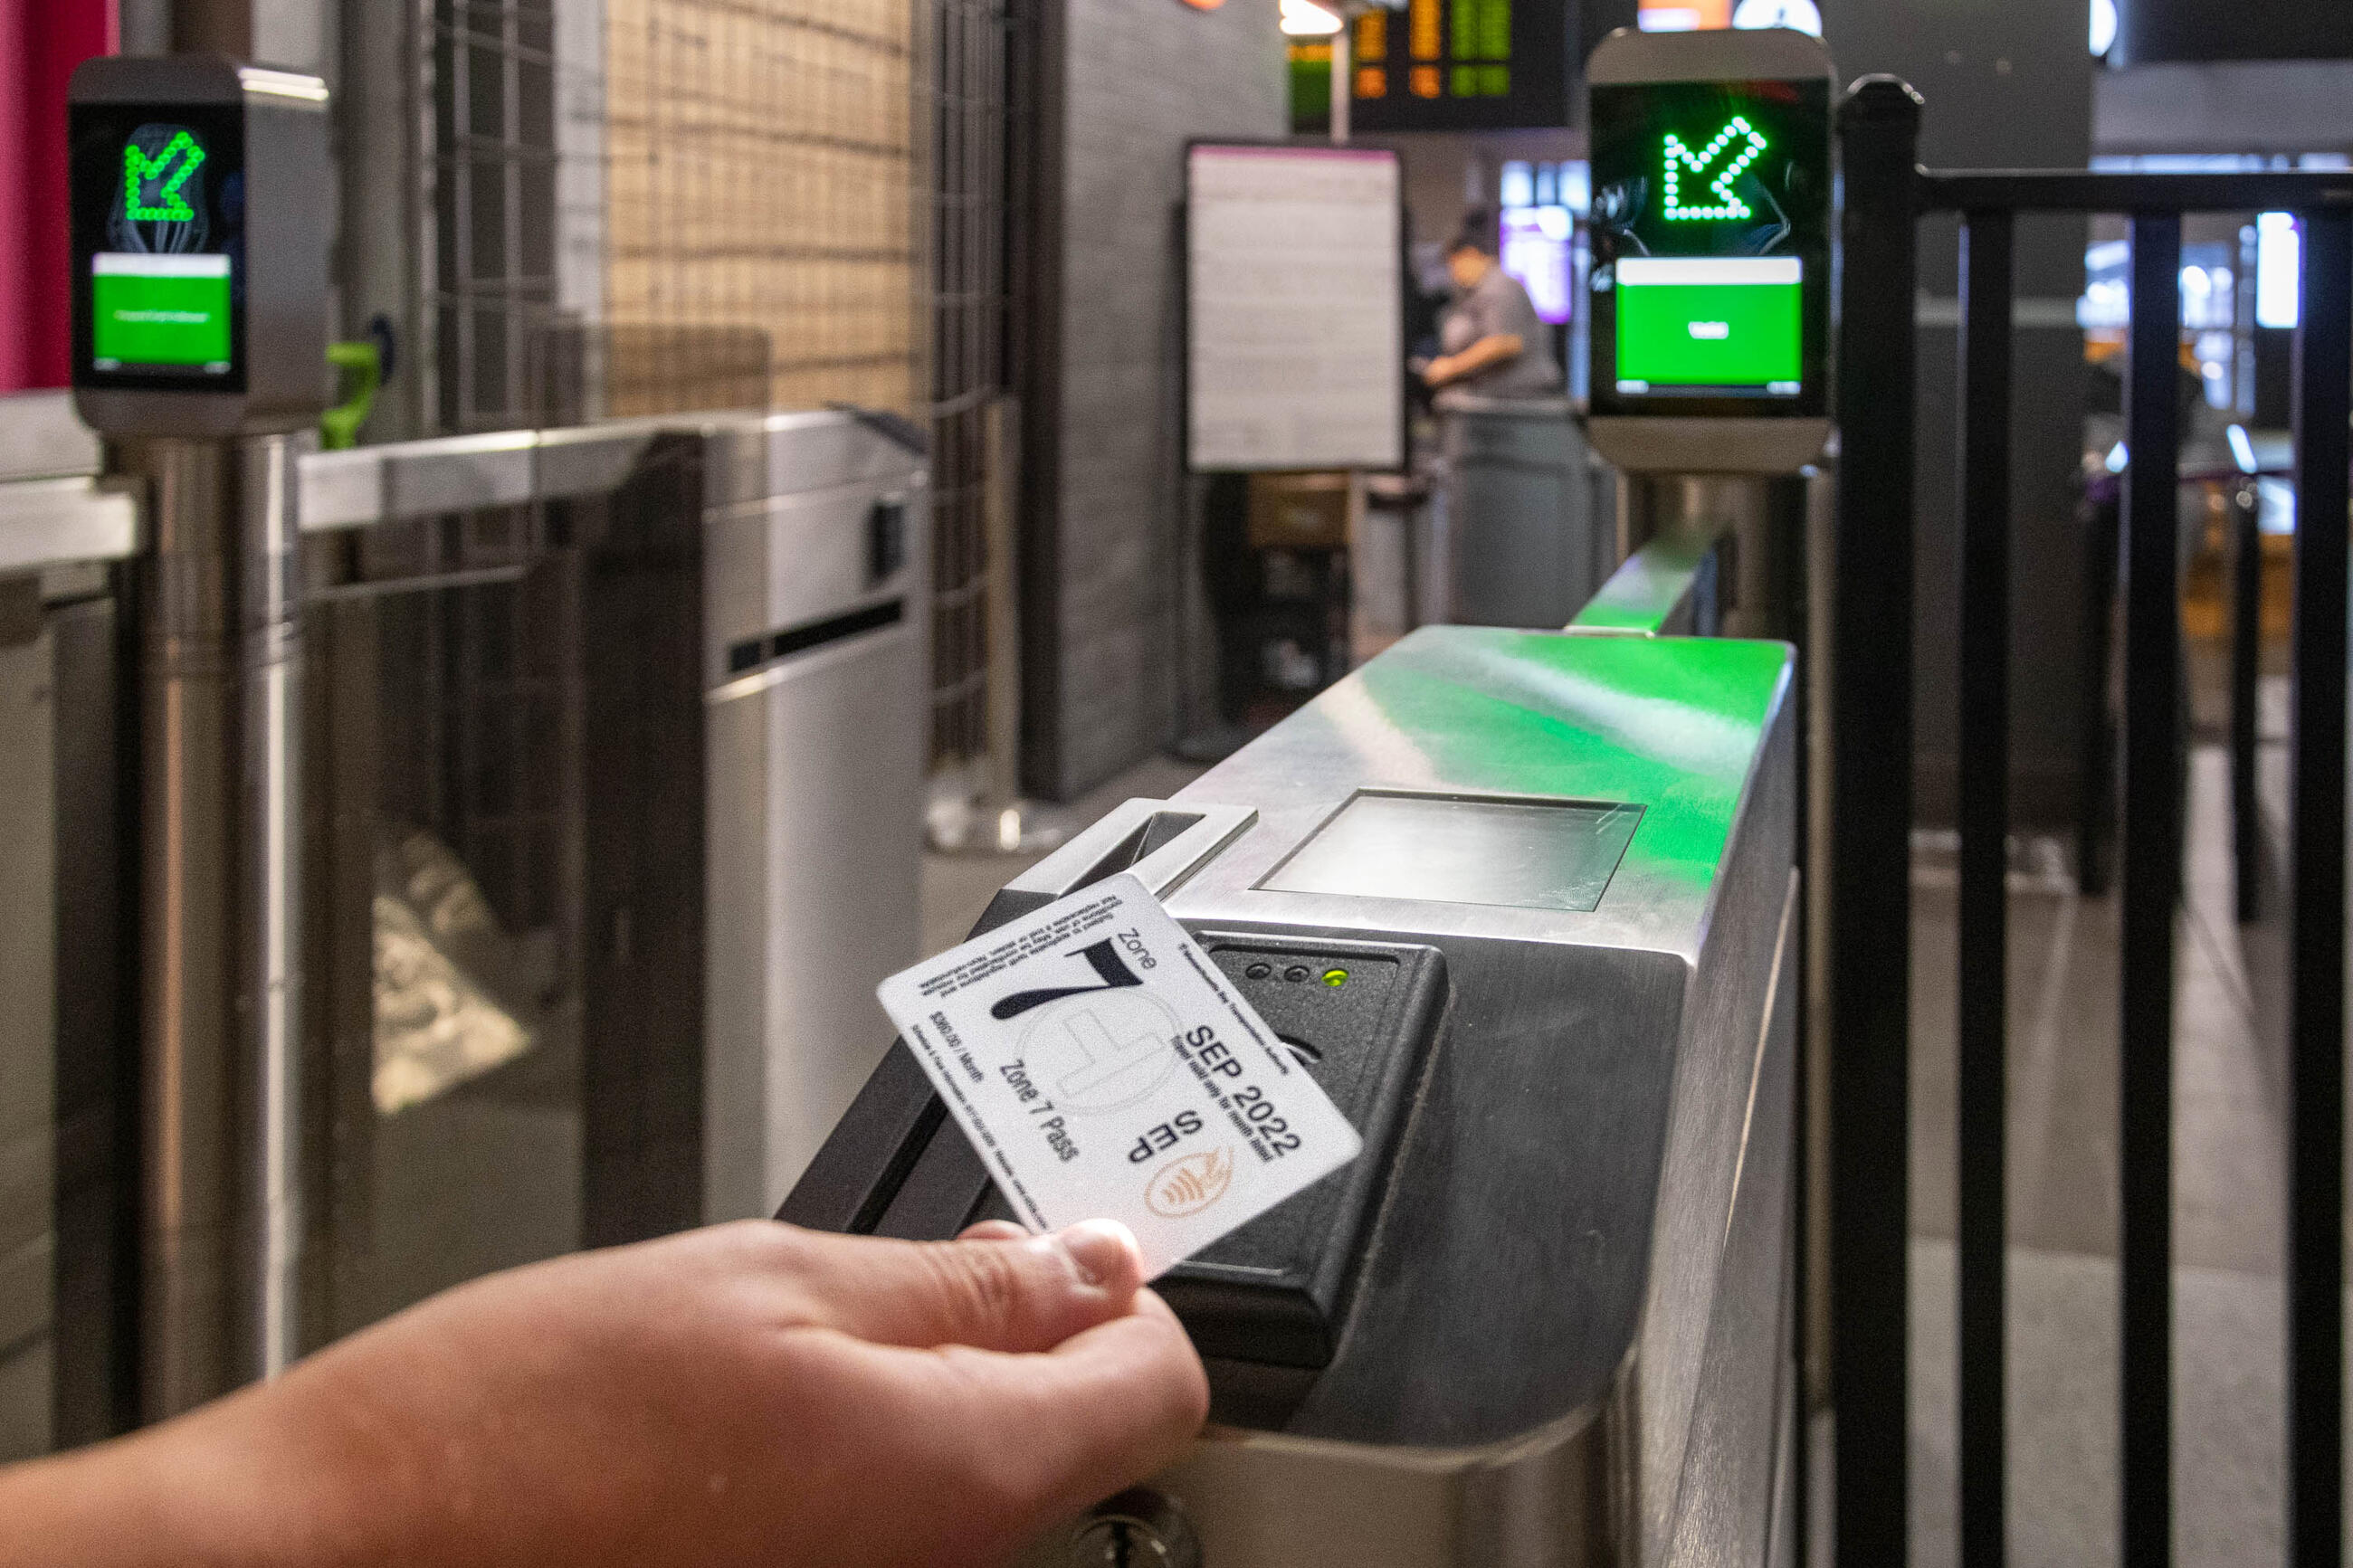 Rider using tappable ticket on new fare gate in North Station